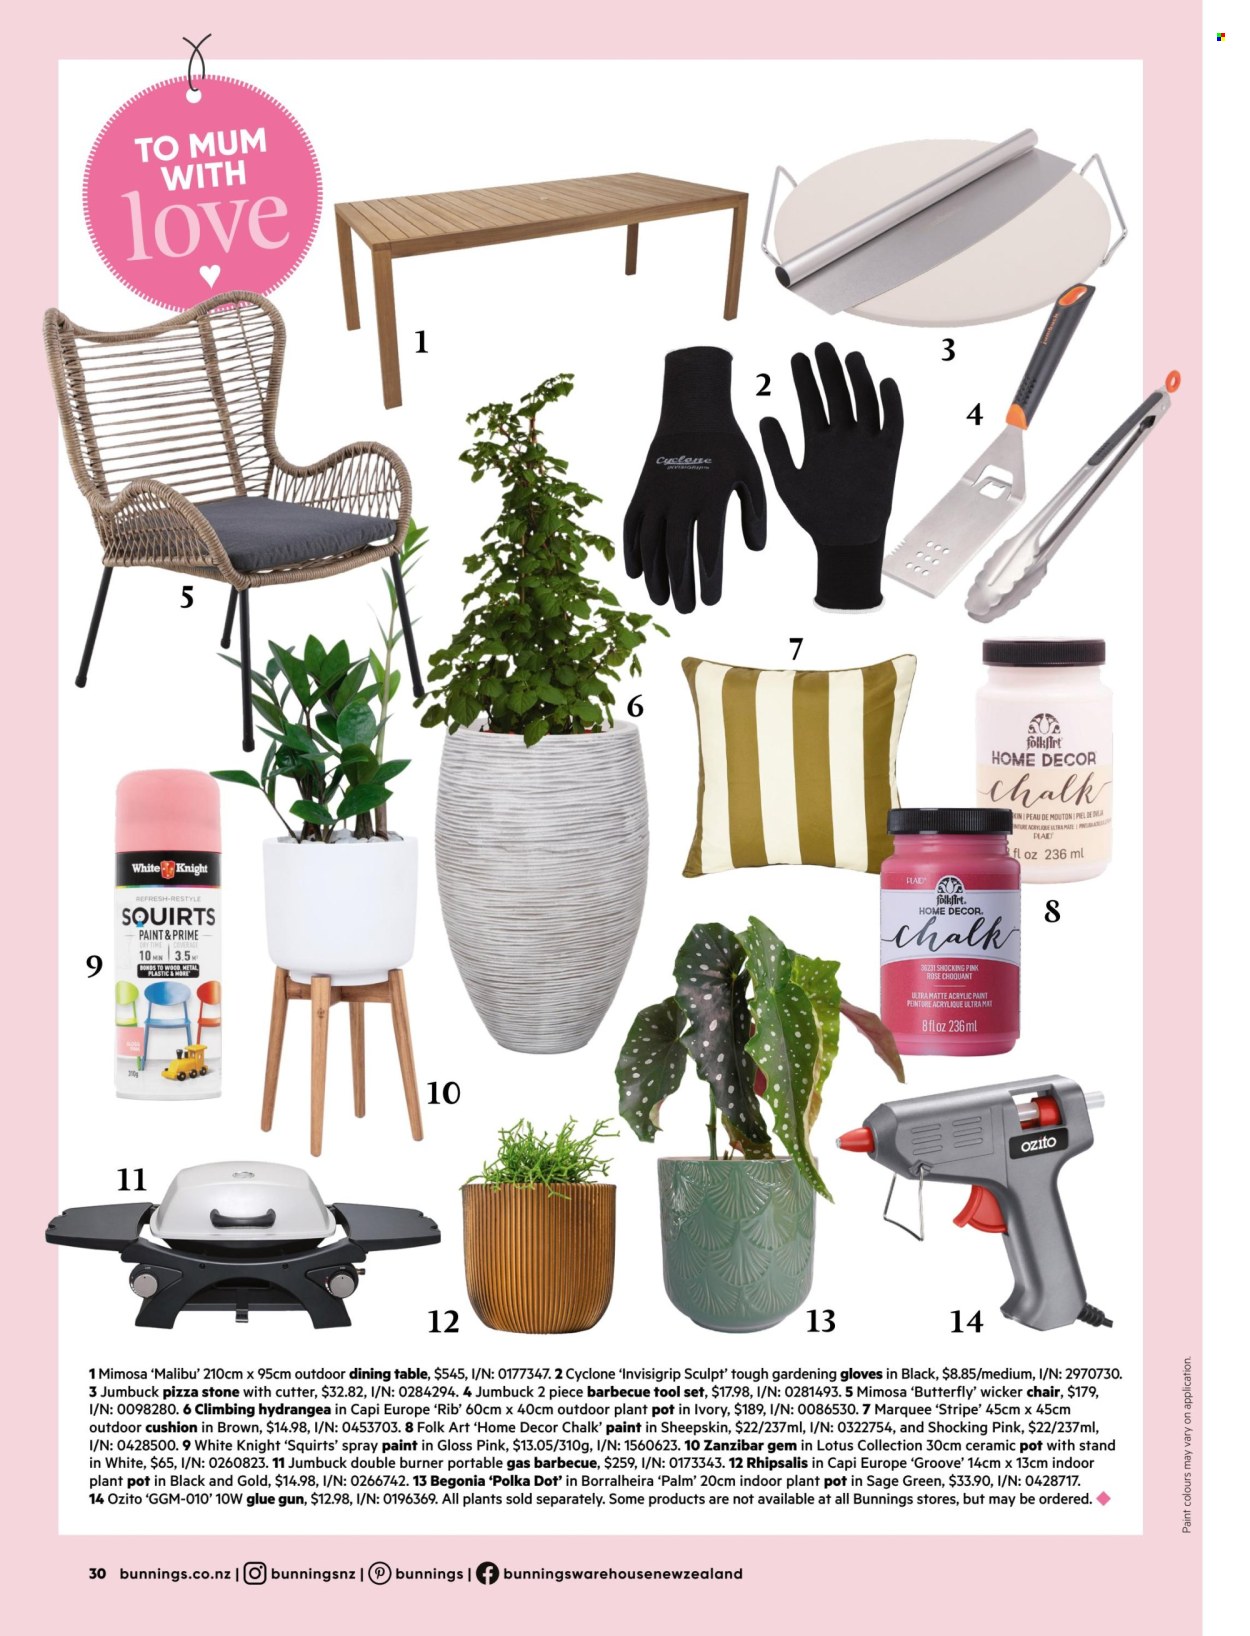 thumbnail - Bunnings Warehouse mailer - Sales products - dining table, table, chair, cushion, pizza stone, gloves, pot, cutter, spray paint, tool set, glue gun, houseplant, begonia, hydrangea, outdoor plant, plant pot, garden gloves. Page 30.